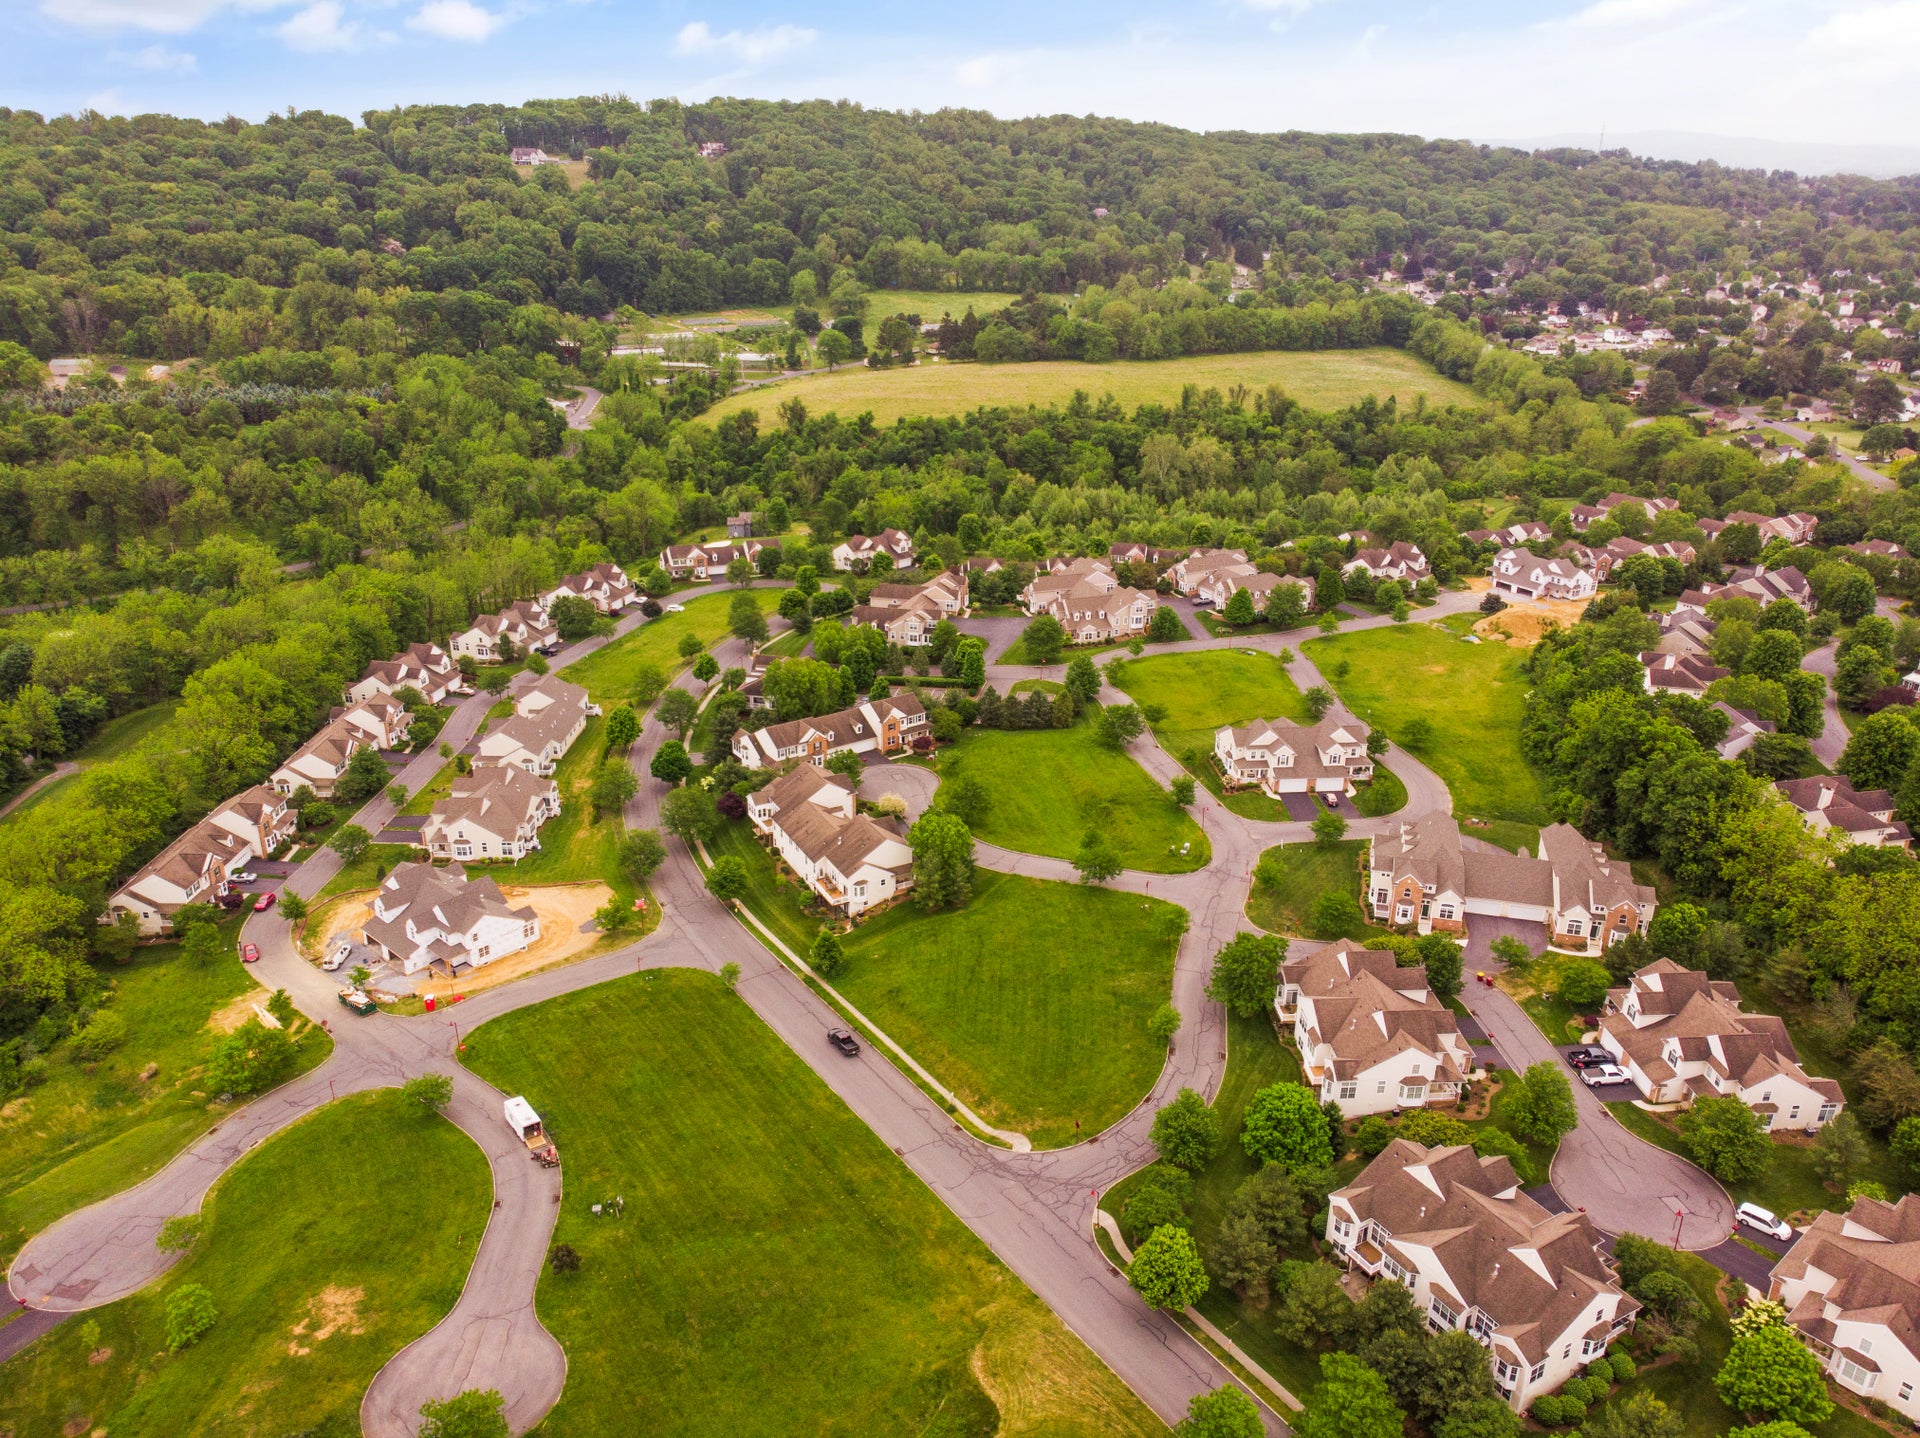 New Homes in Easton, PA